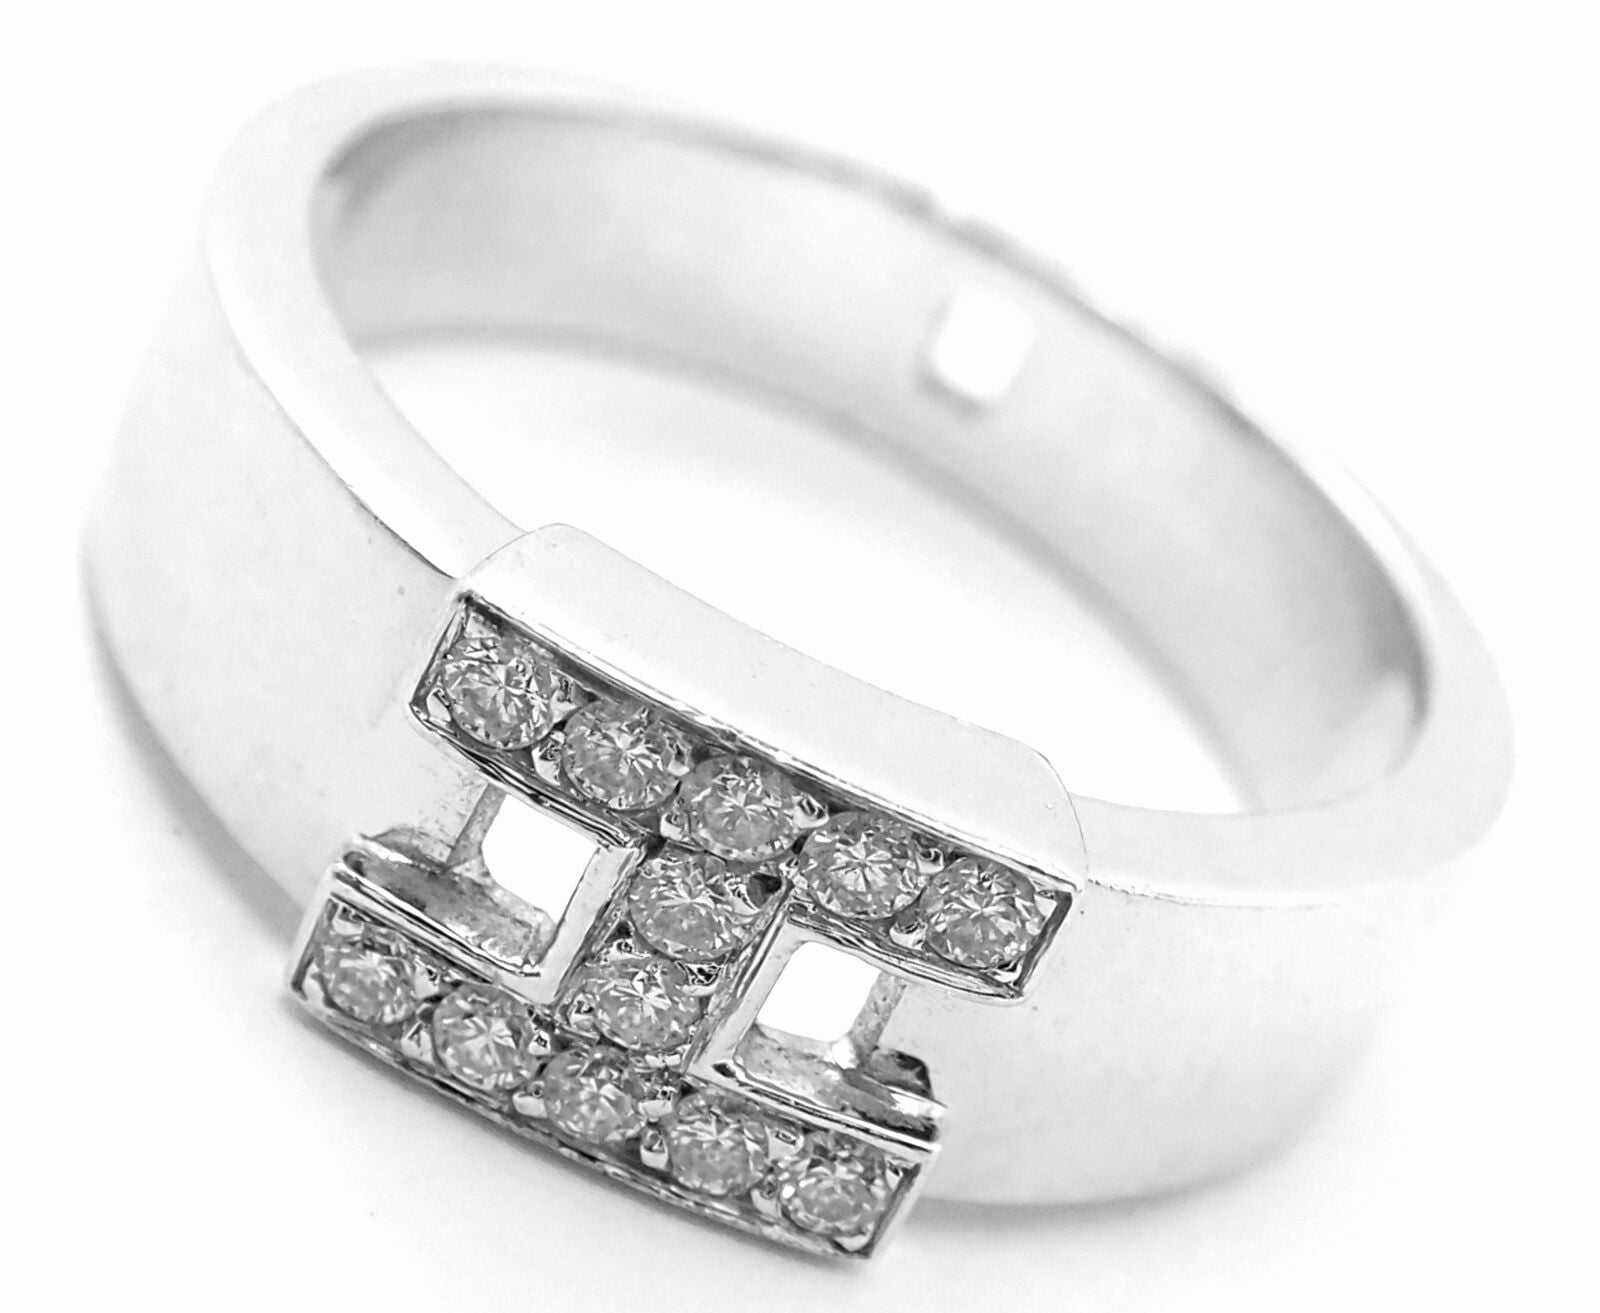 Authentic! Hermes 18k White Gold Diamond H Band Ring Fortrove